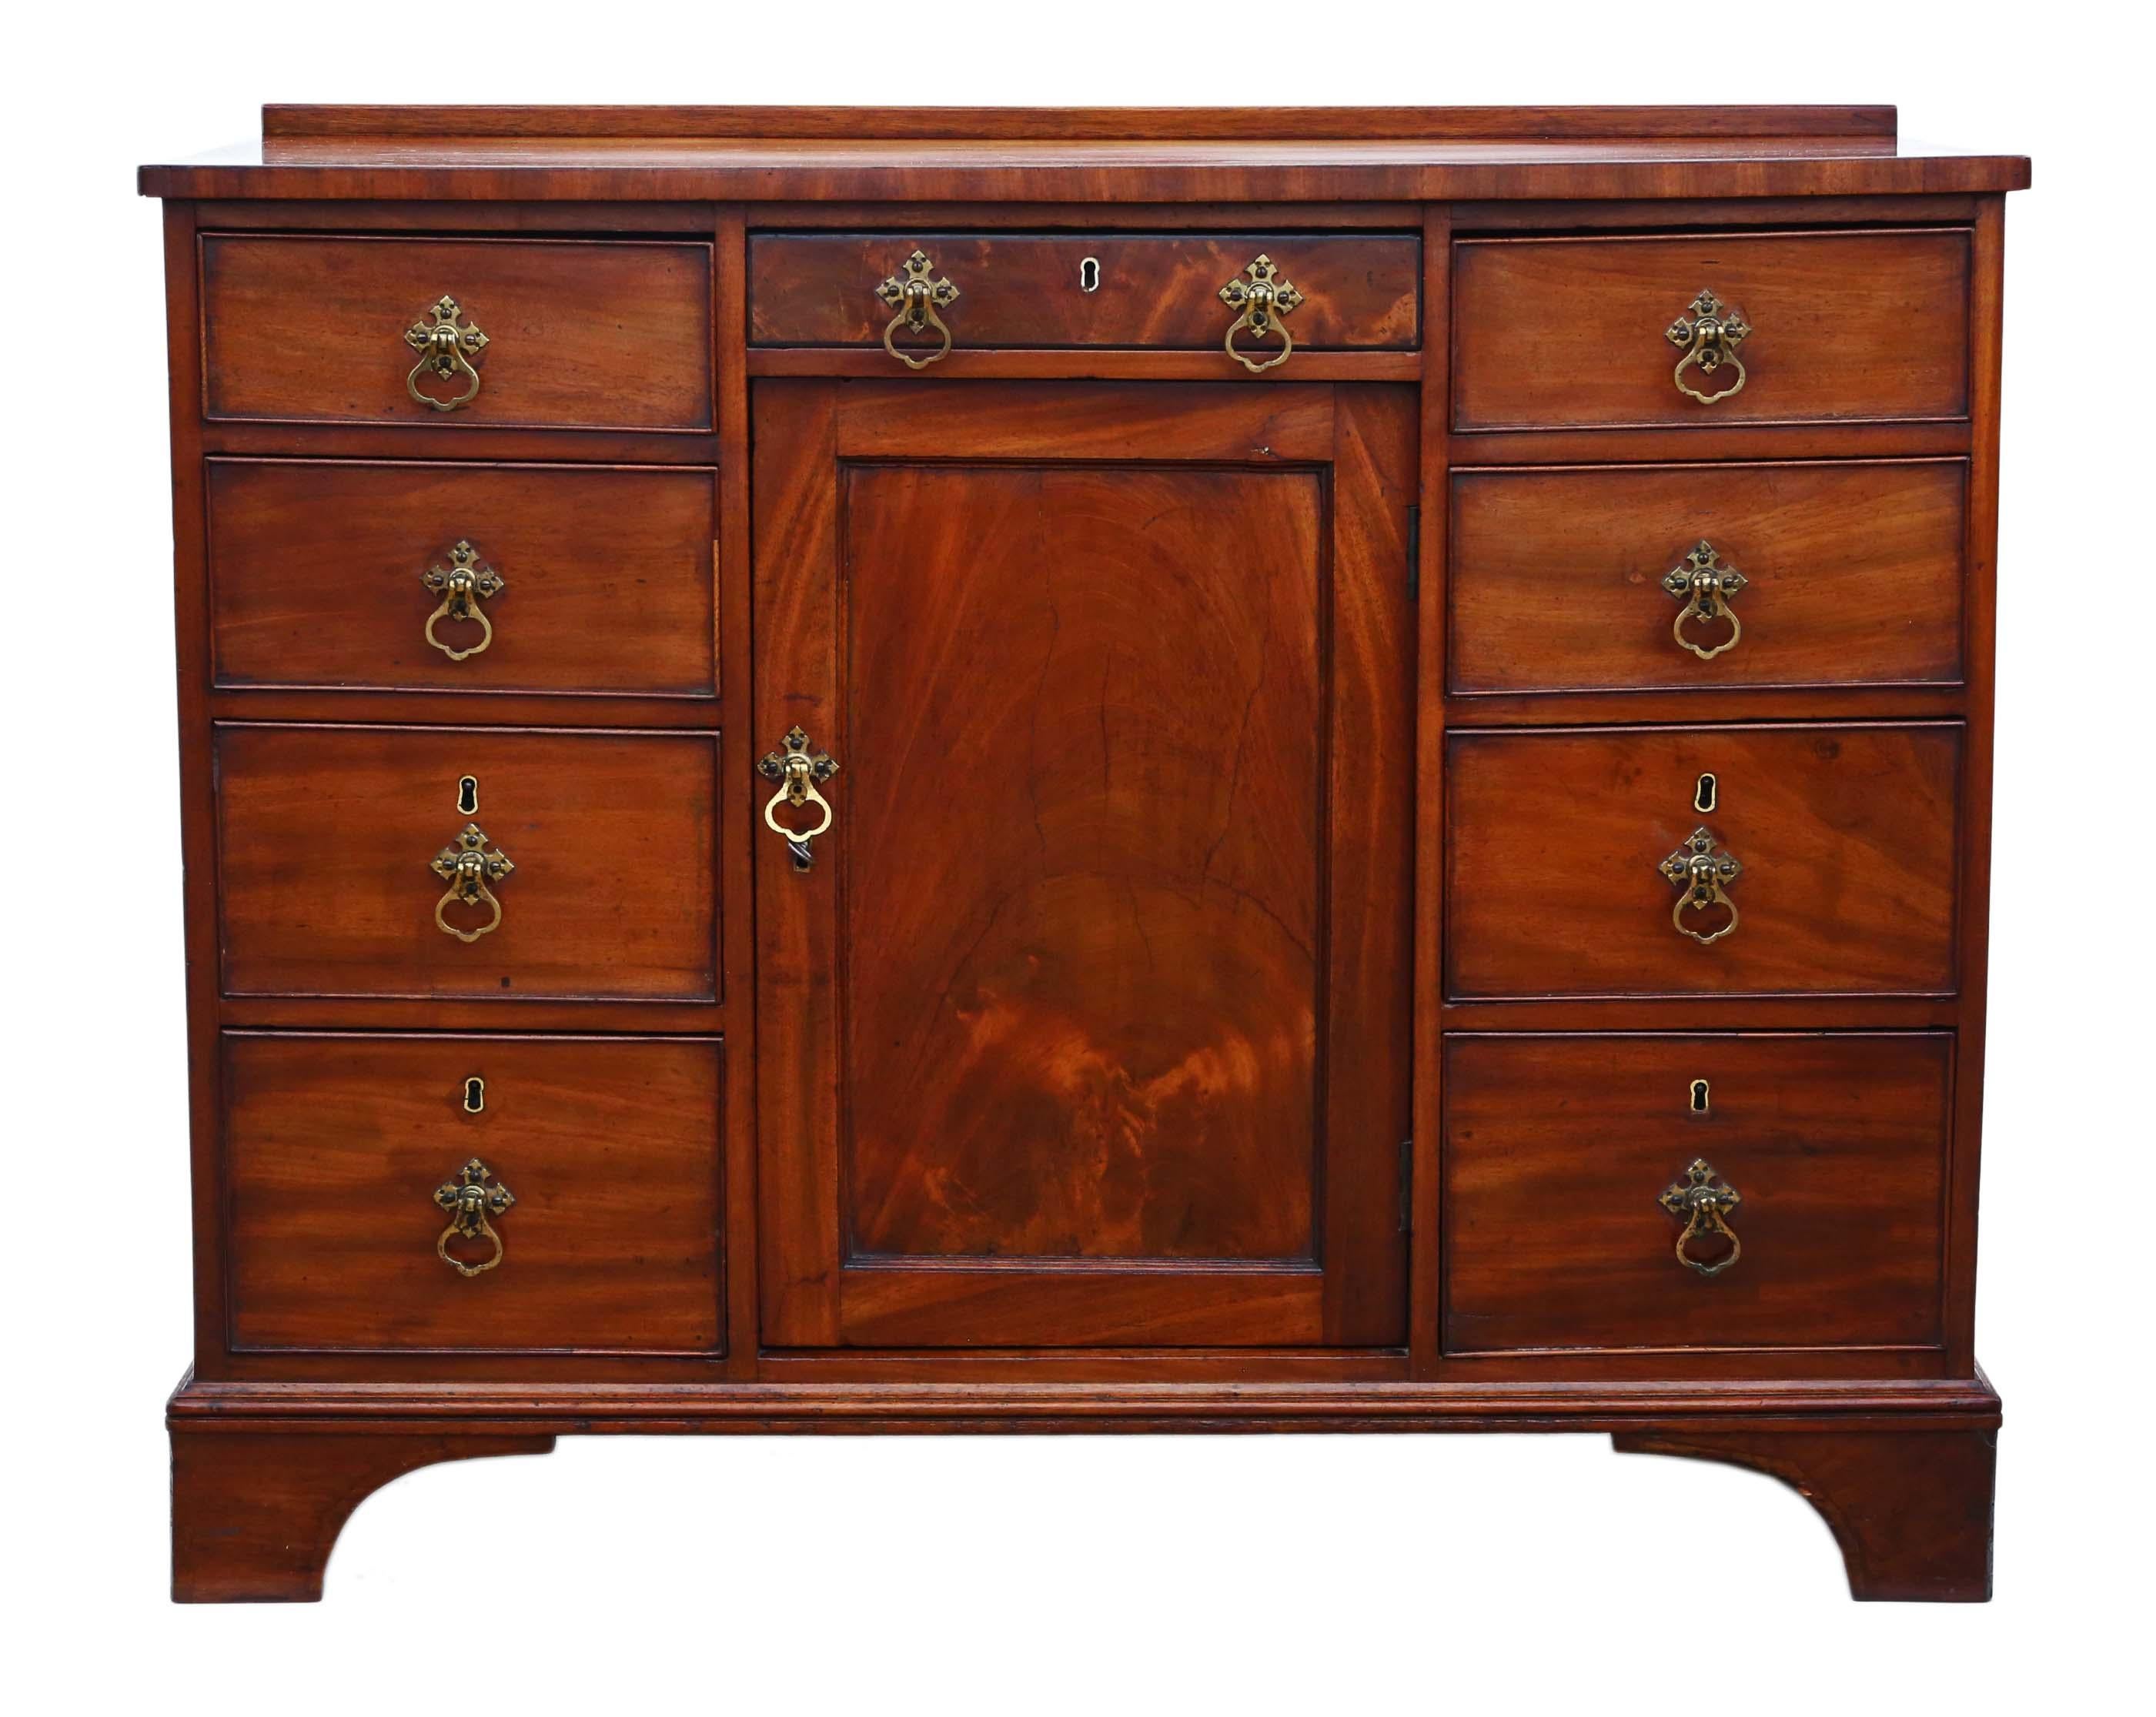 Antique fine quality Georgian 19th century circa 1820 mahogany writing desk dressing table.

Solid and no loose joints. Full of age, character and charm. The drawers slide freely. A rare and attractive find. The drawers are lined in old blue paper